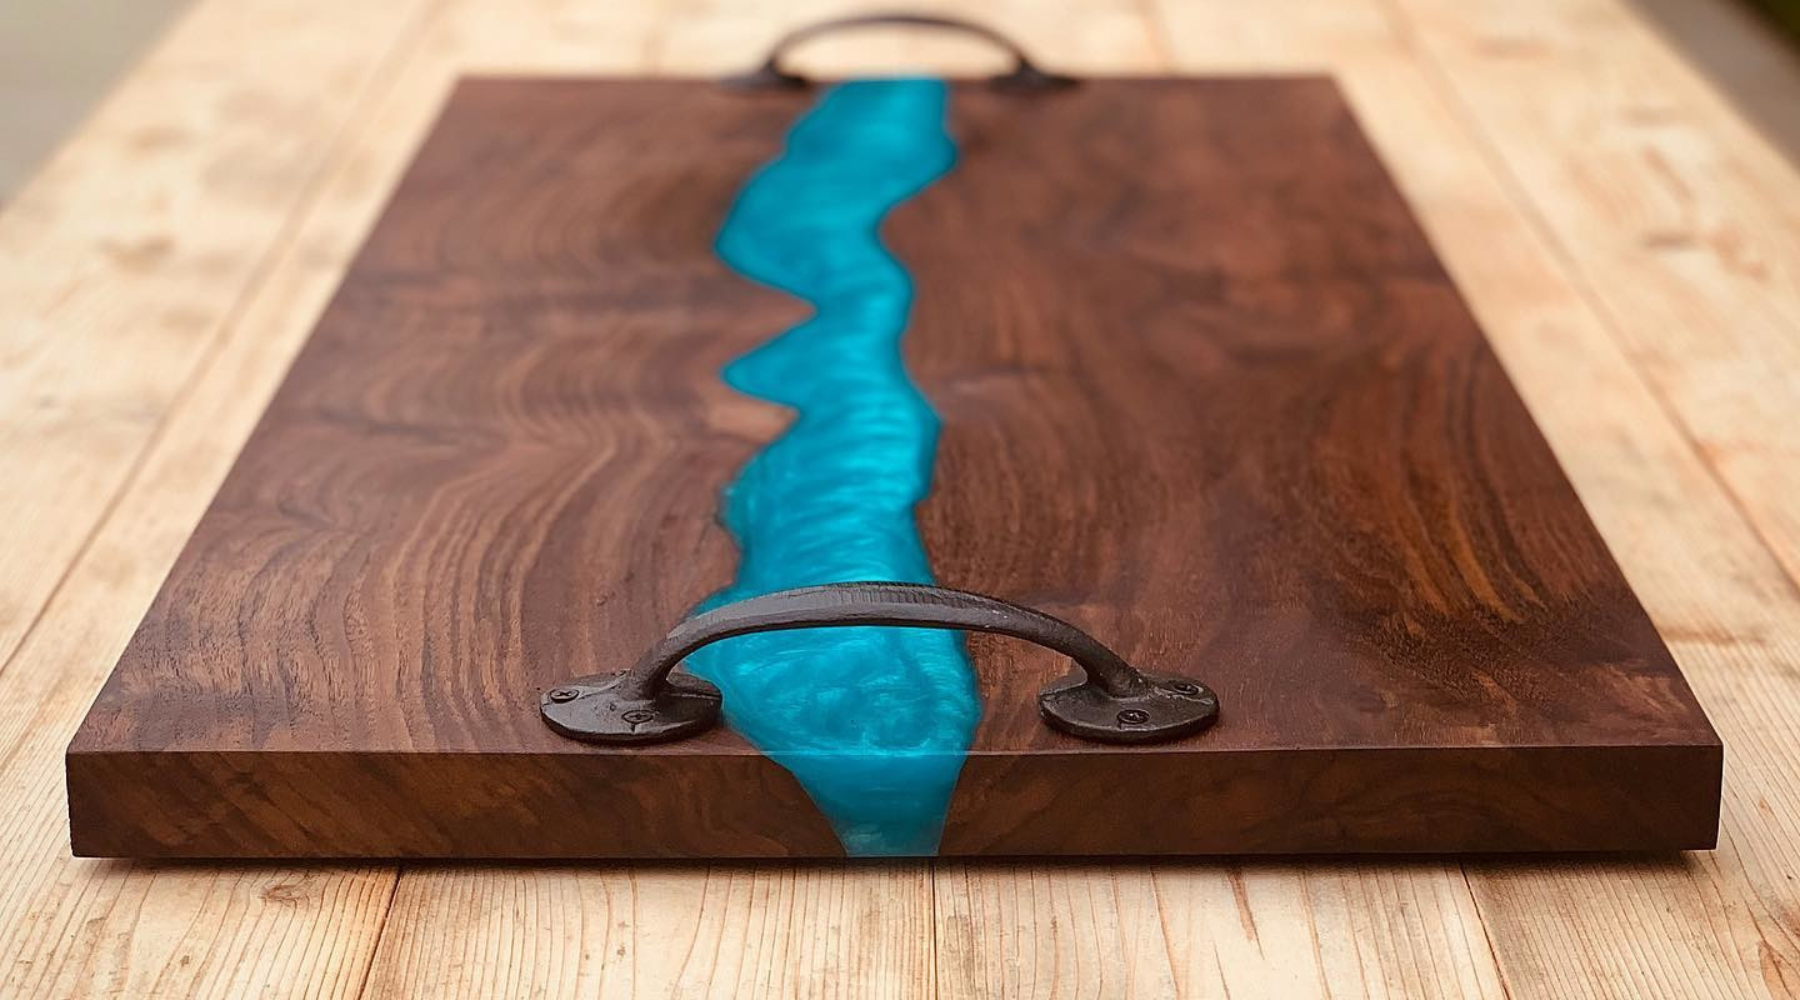 A walnut charcuterie board with an epoxy river pour down the middle in bright blue sitting on a light wooden surface ready for cleaning an epoxy surface